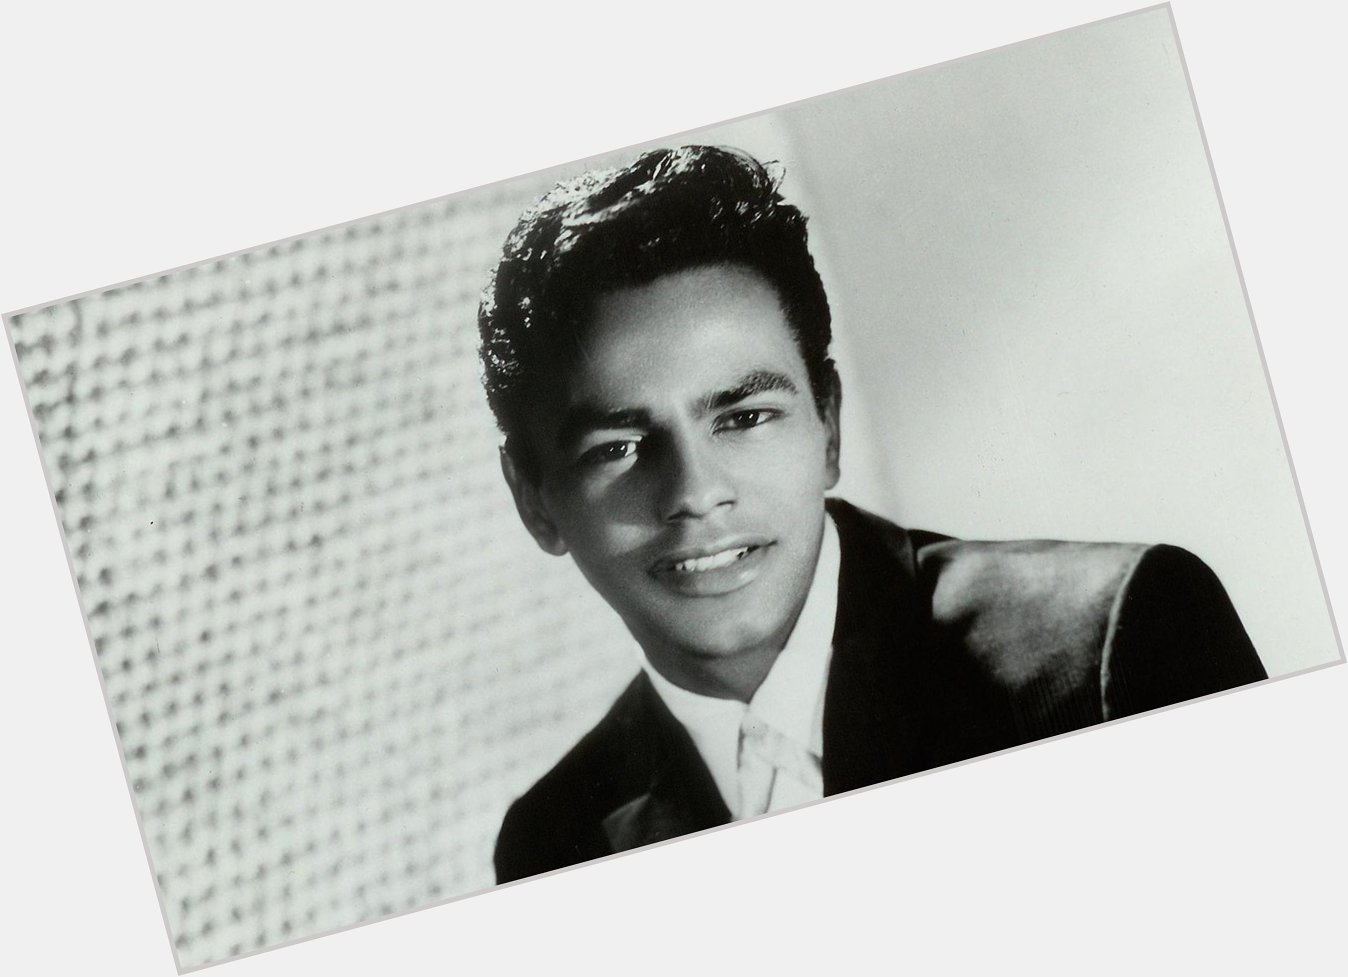 HAPPY BIRTHDAY... JOHNNY MATHIS! \"TOO MUCH, TOO LITTLE, TO LATE\"
ft Deniece Williams. 